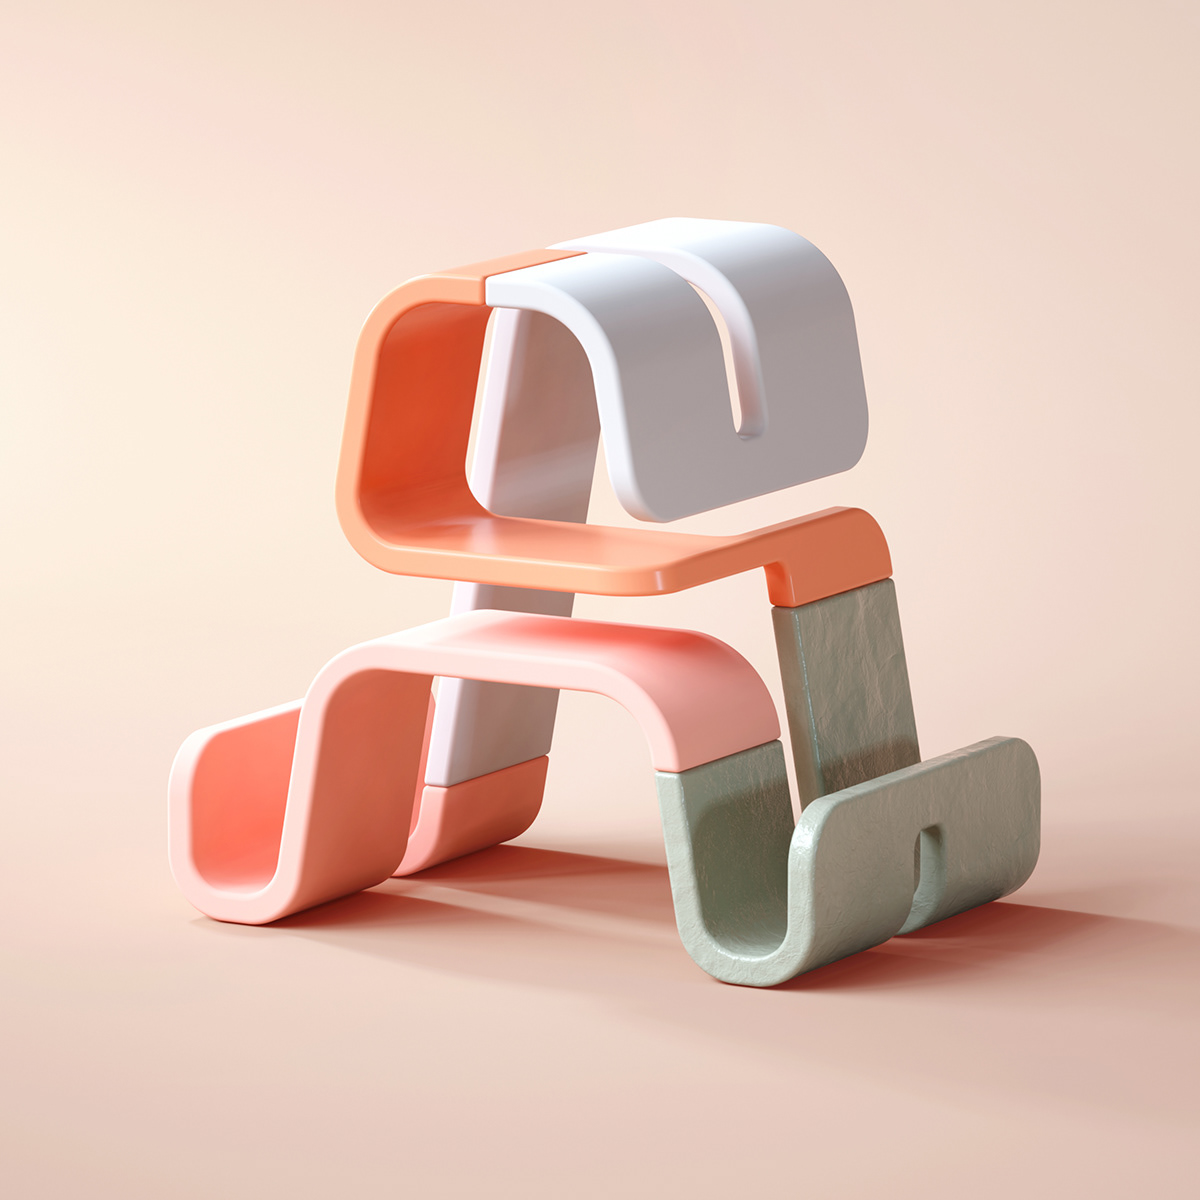 36daysoftype 3D numbers letters alphabets ufho singapore c4d 36days type.